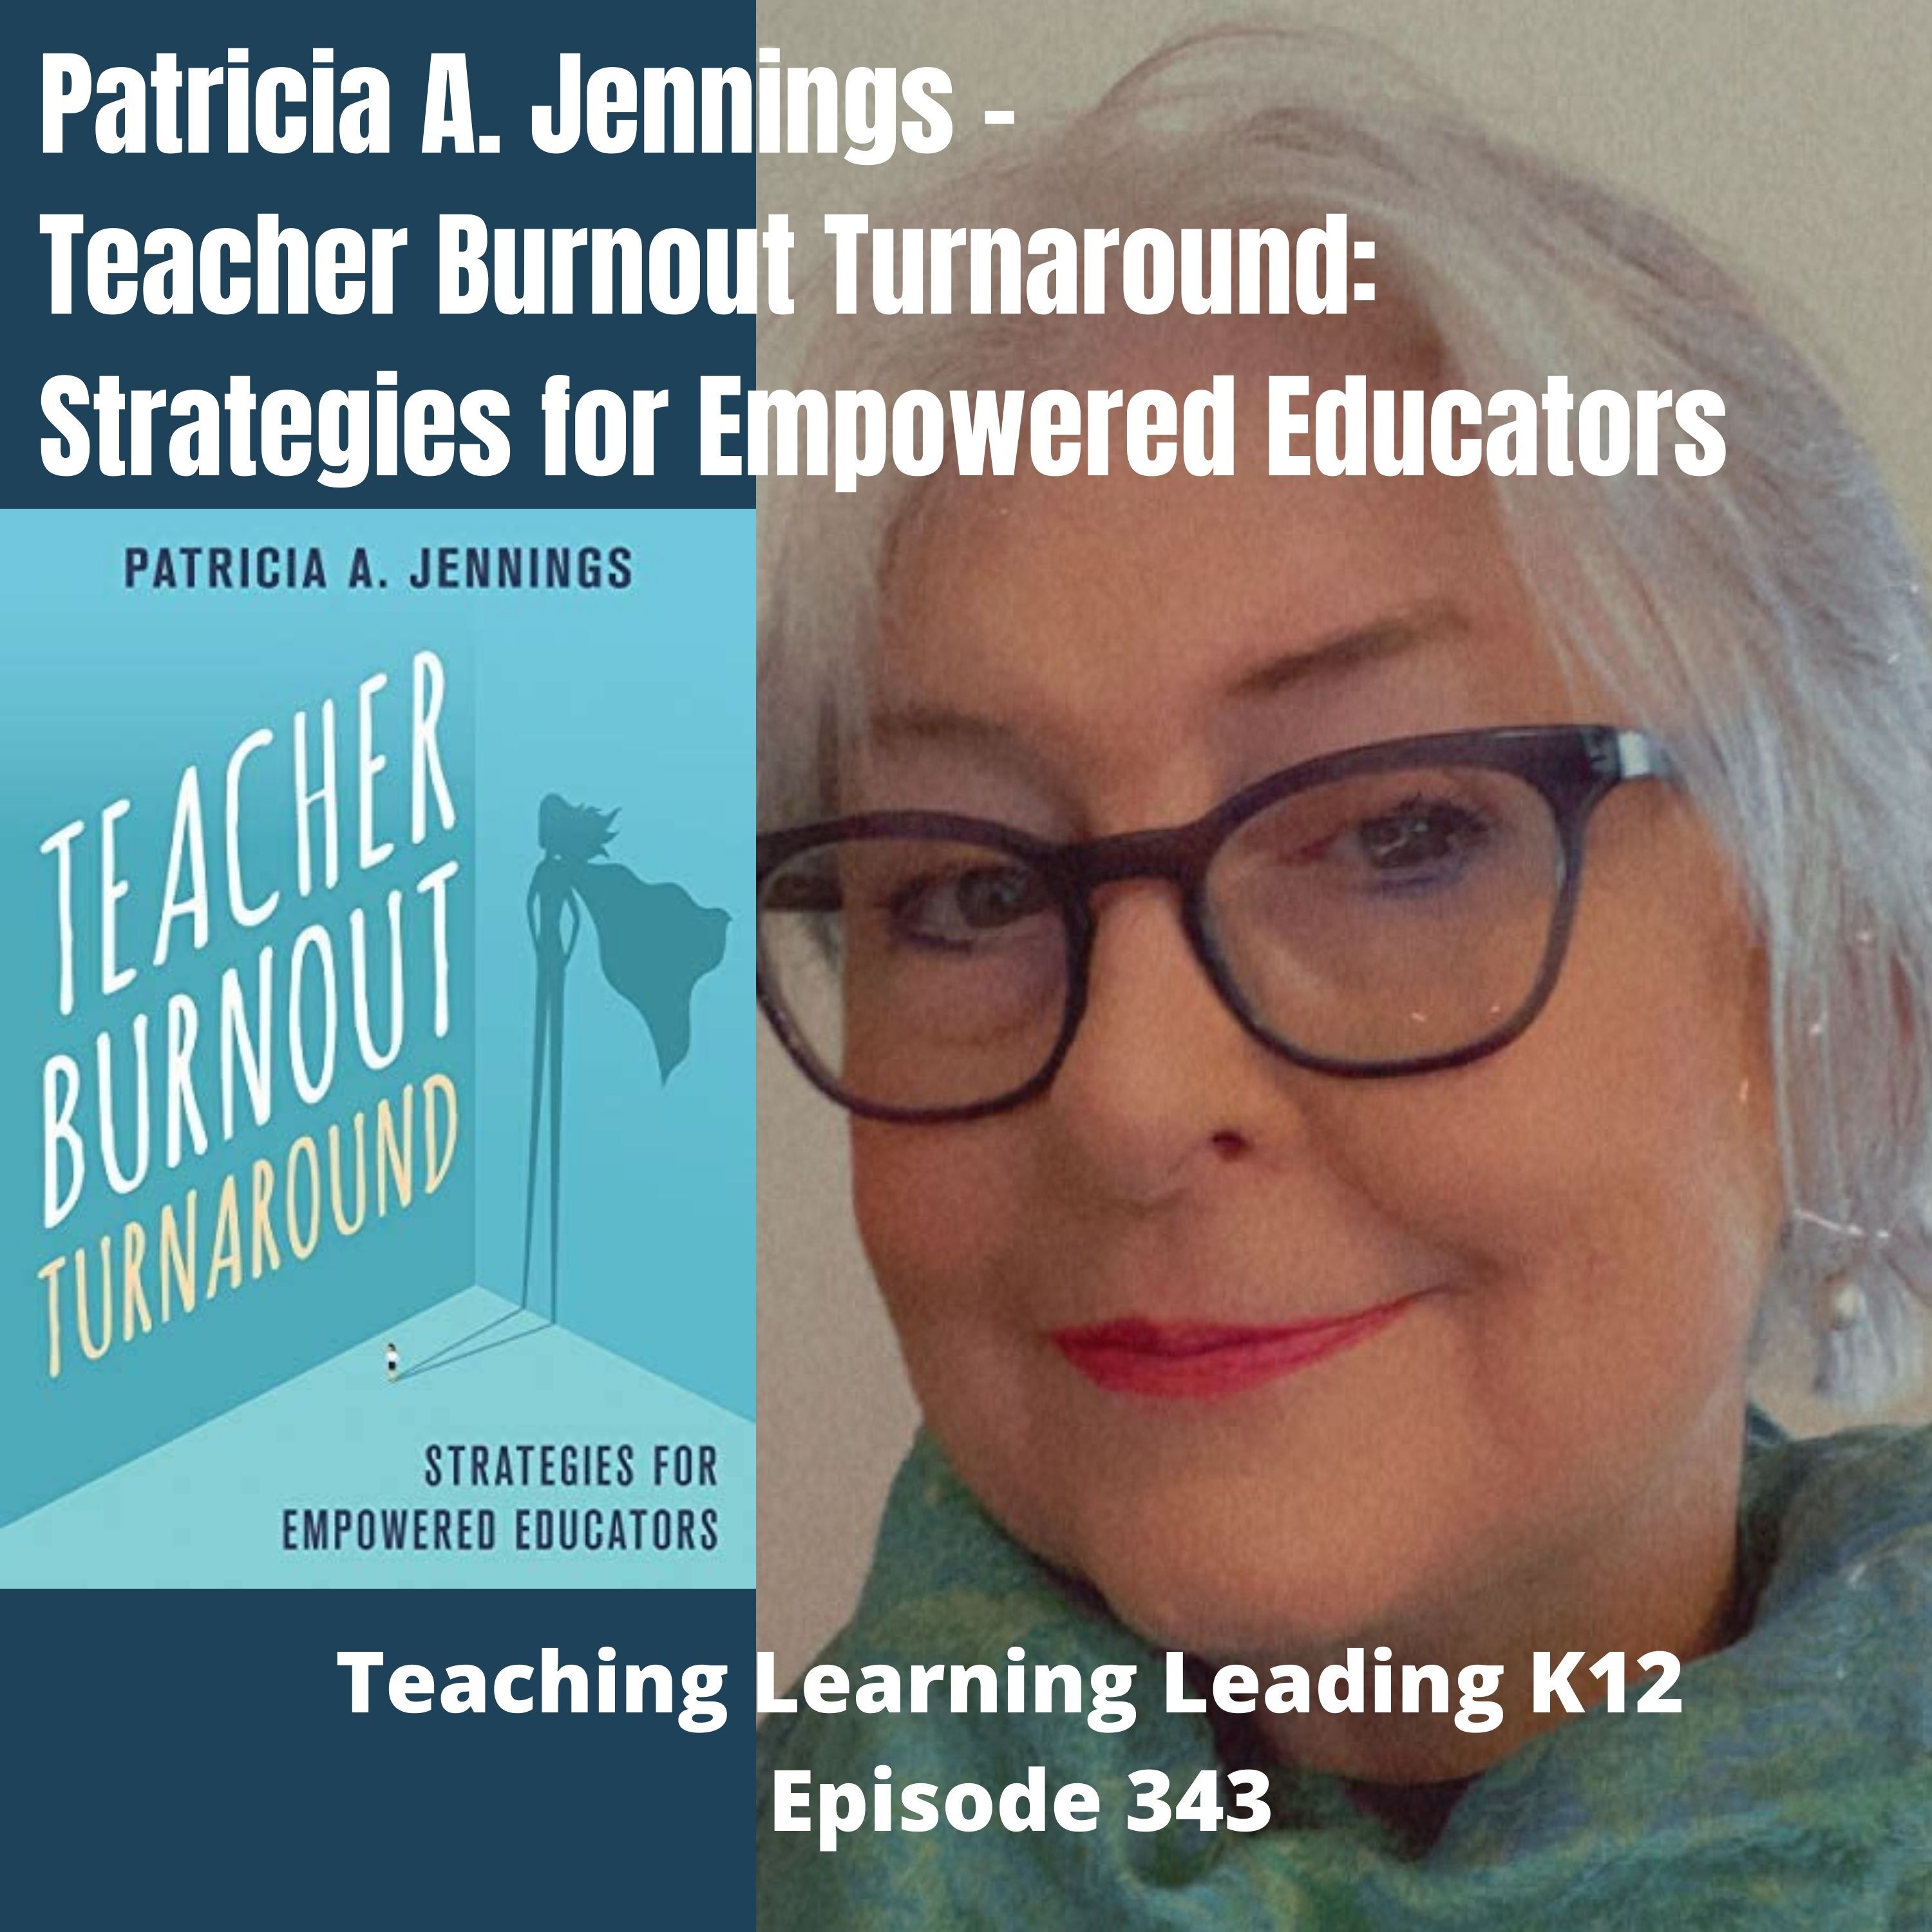 Patricia A. Jennings - Teacher Burnout Turnaround: Strategies for Empowered Educators - 343 Image